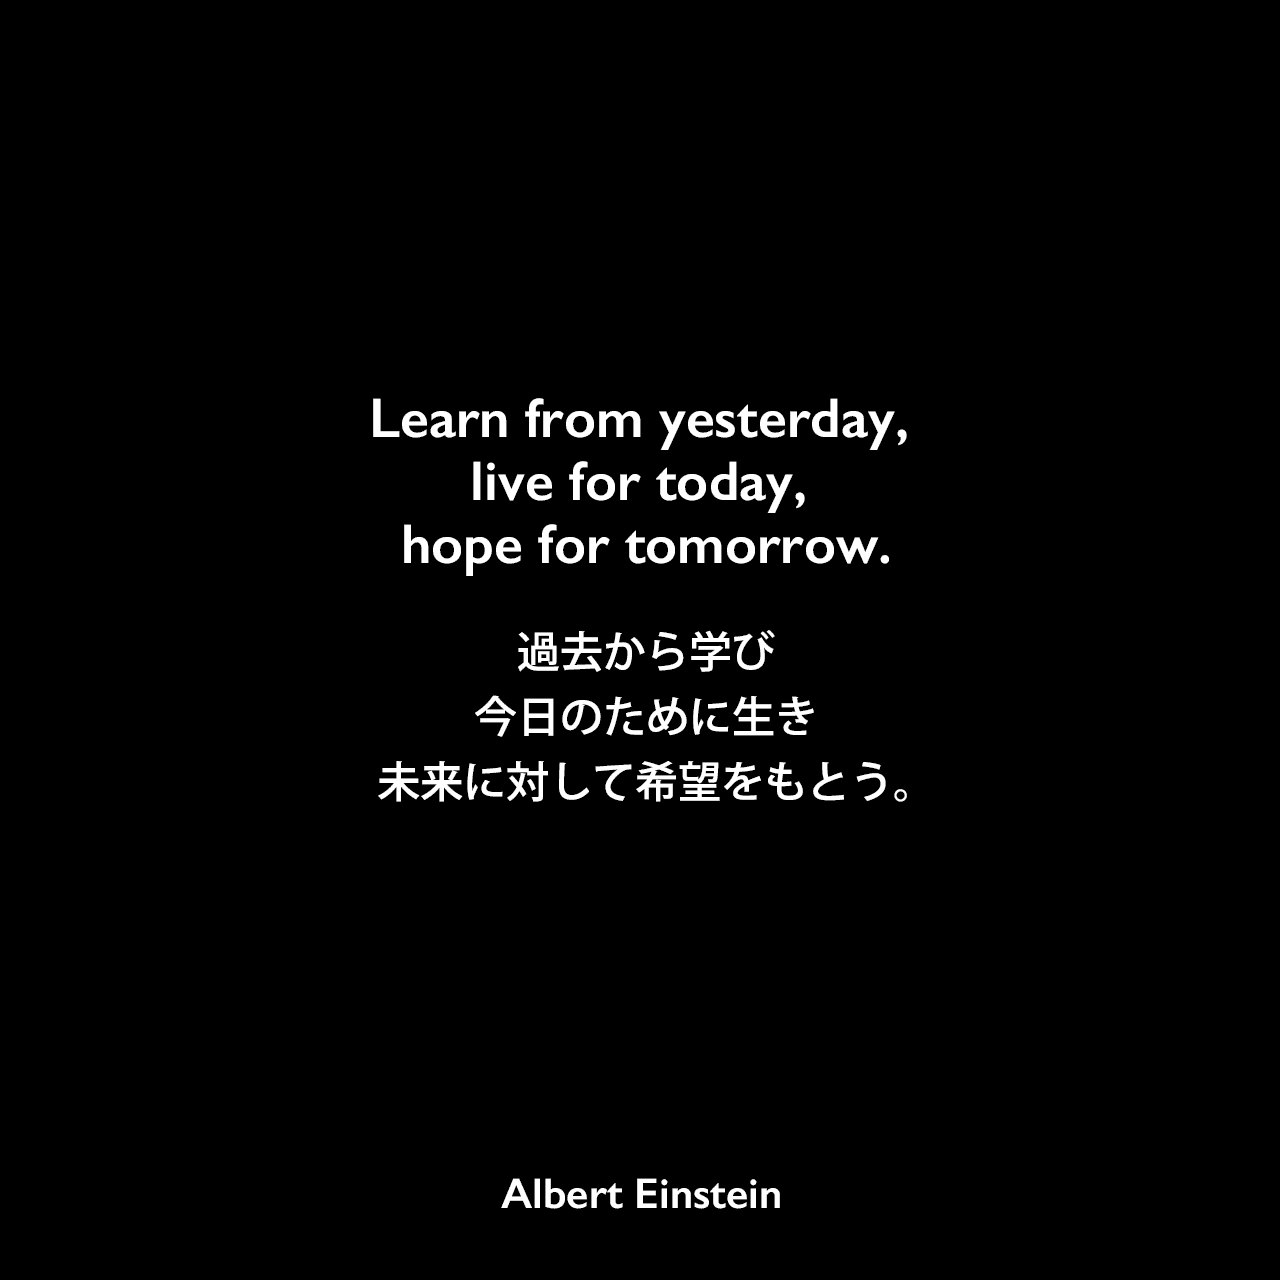 Learn from yesterday, live for today, hope for tomorrow.過去から学び、今日のために生き、未来に対して希望をもとう。